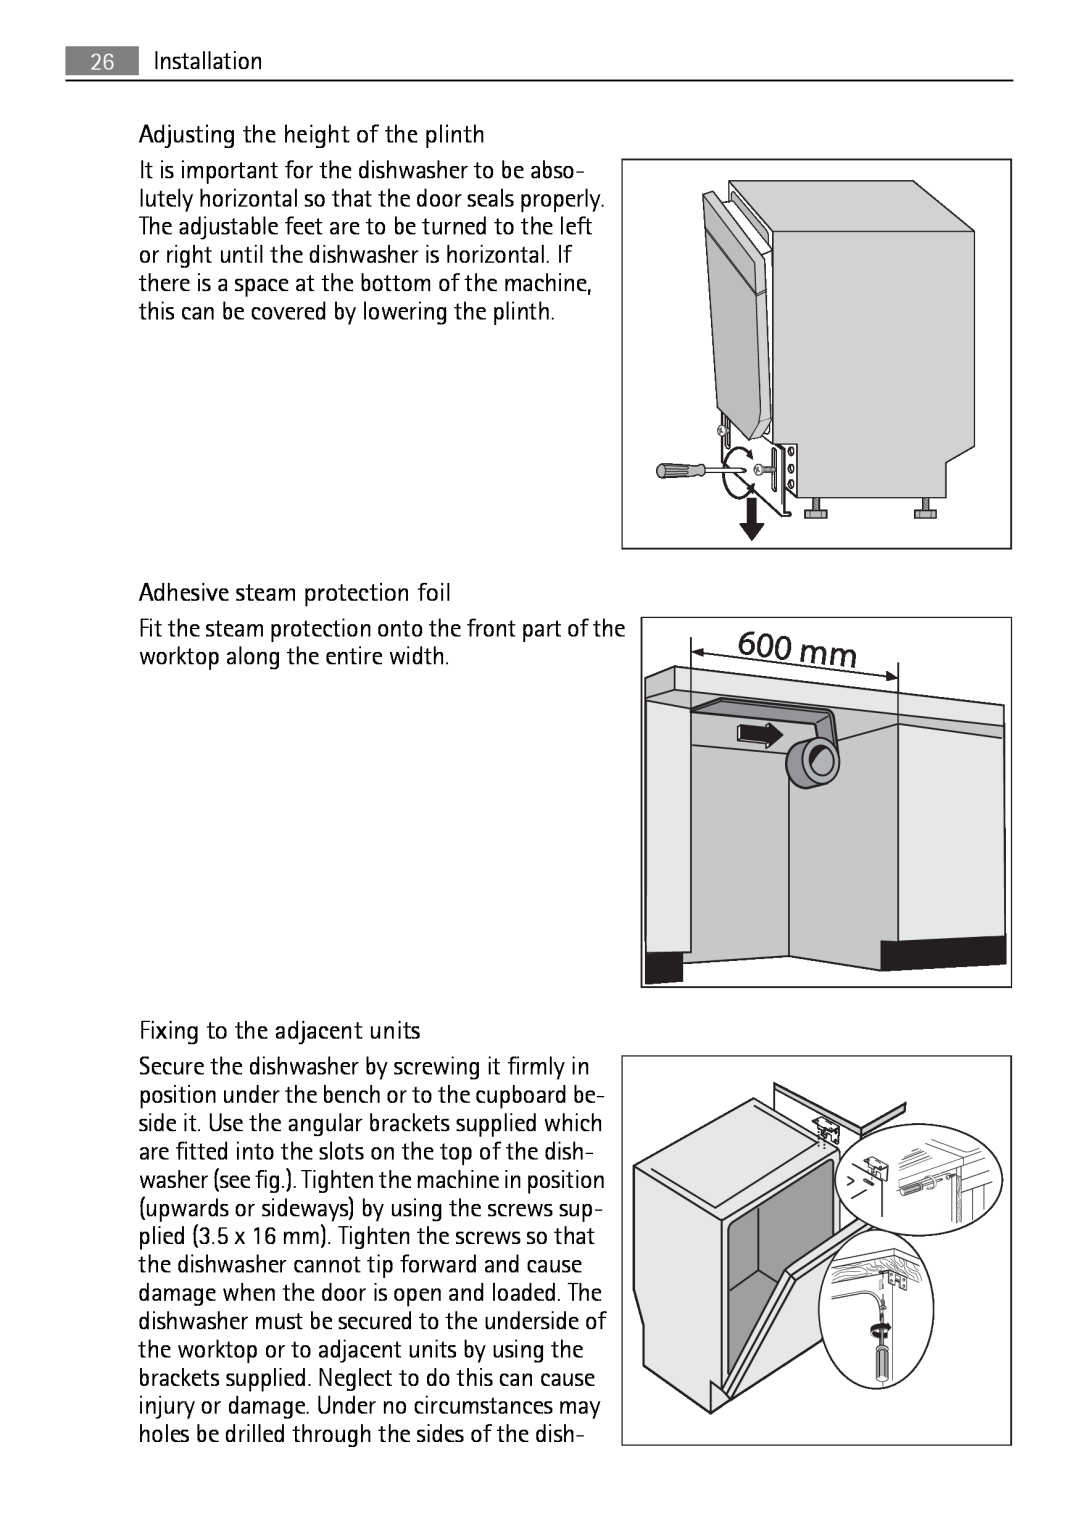 Electrolux QB 5201 user manual Installation, Adjusting the height of the plinth, Adhesive steam protection foil 